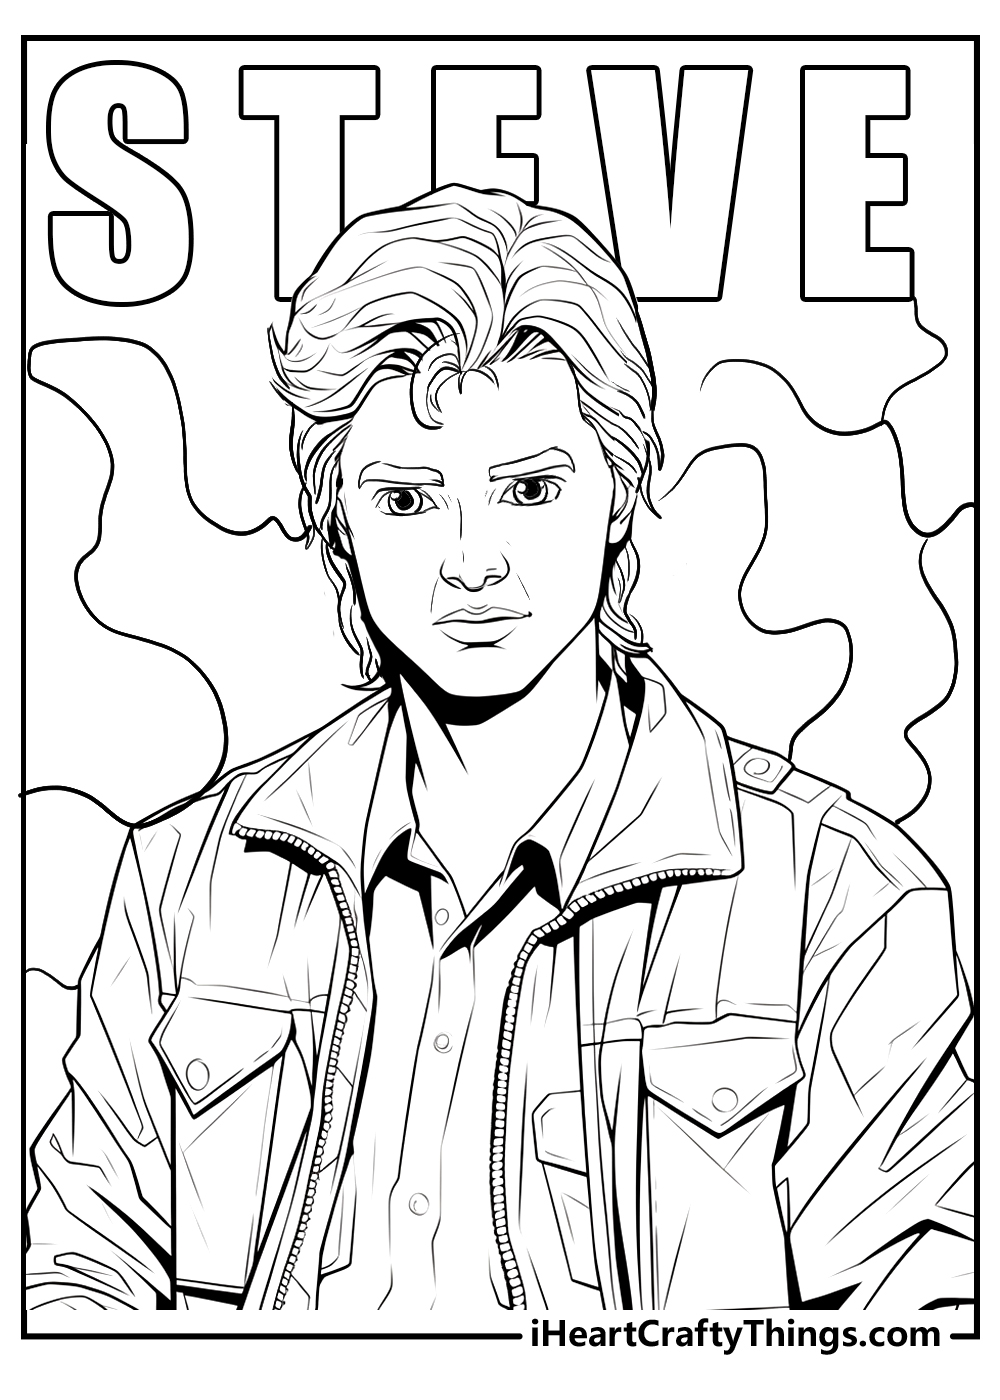 steve from stranger things coloring pages